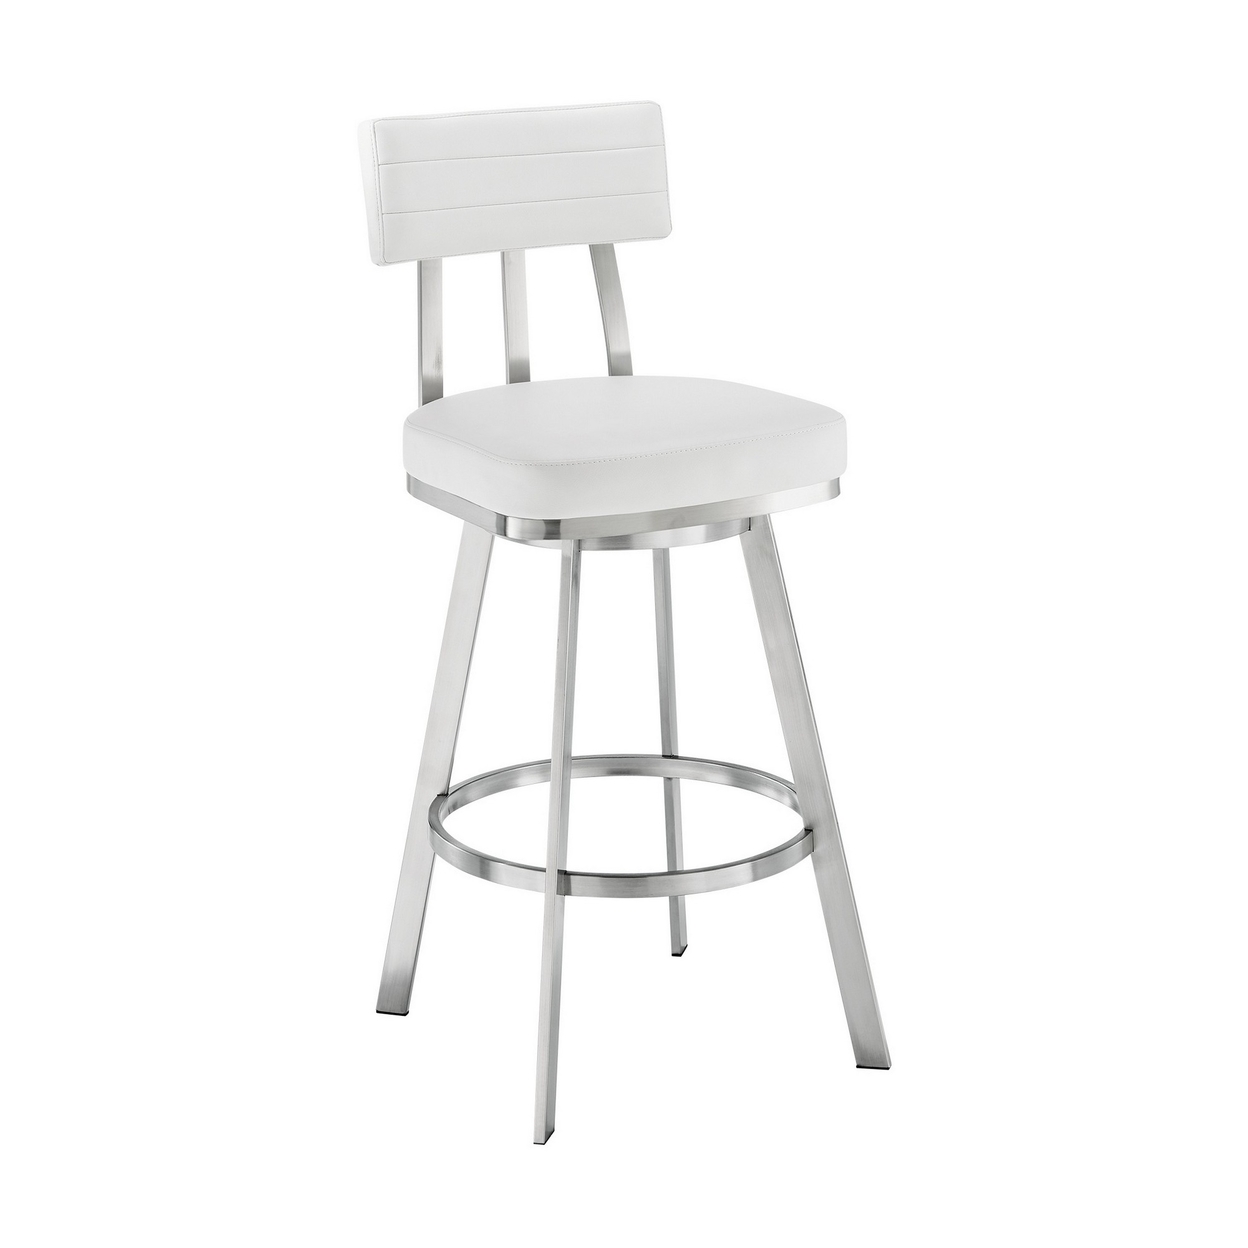 Col 26 Inch Swivel Counter Stool, White Faux Leather, Stainless Steel Frame- Saltoro Sherpi